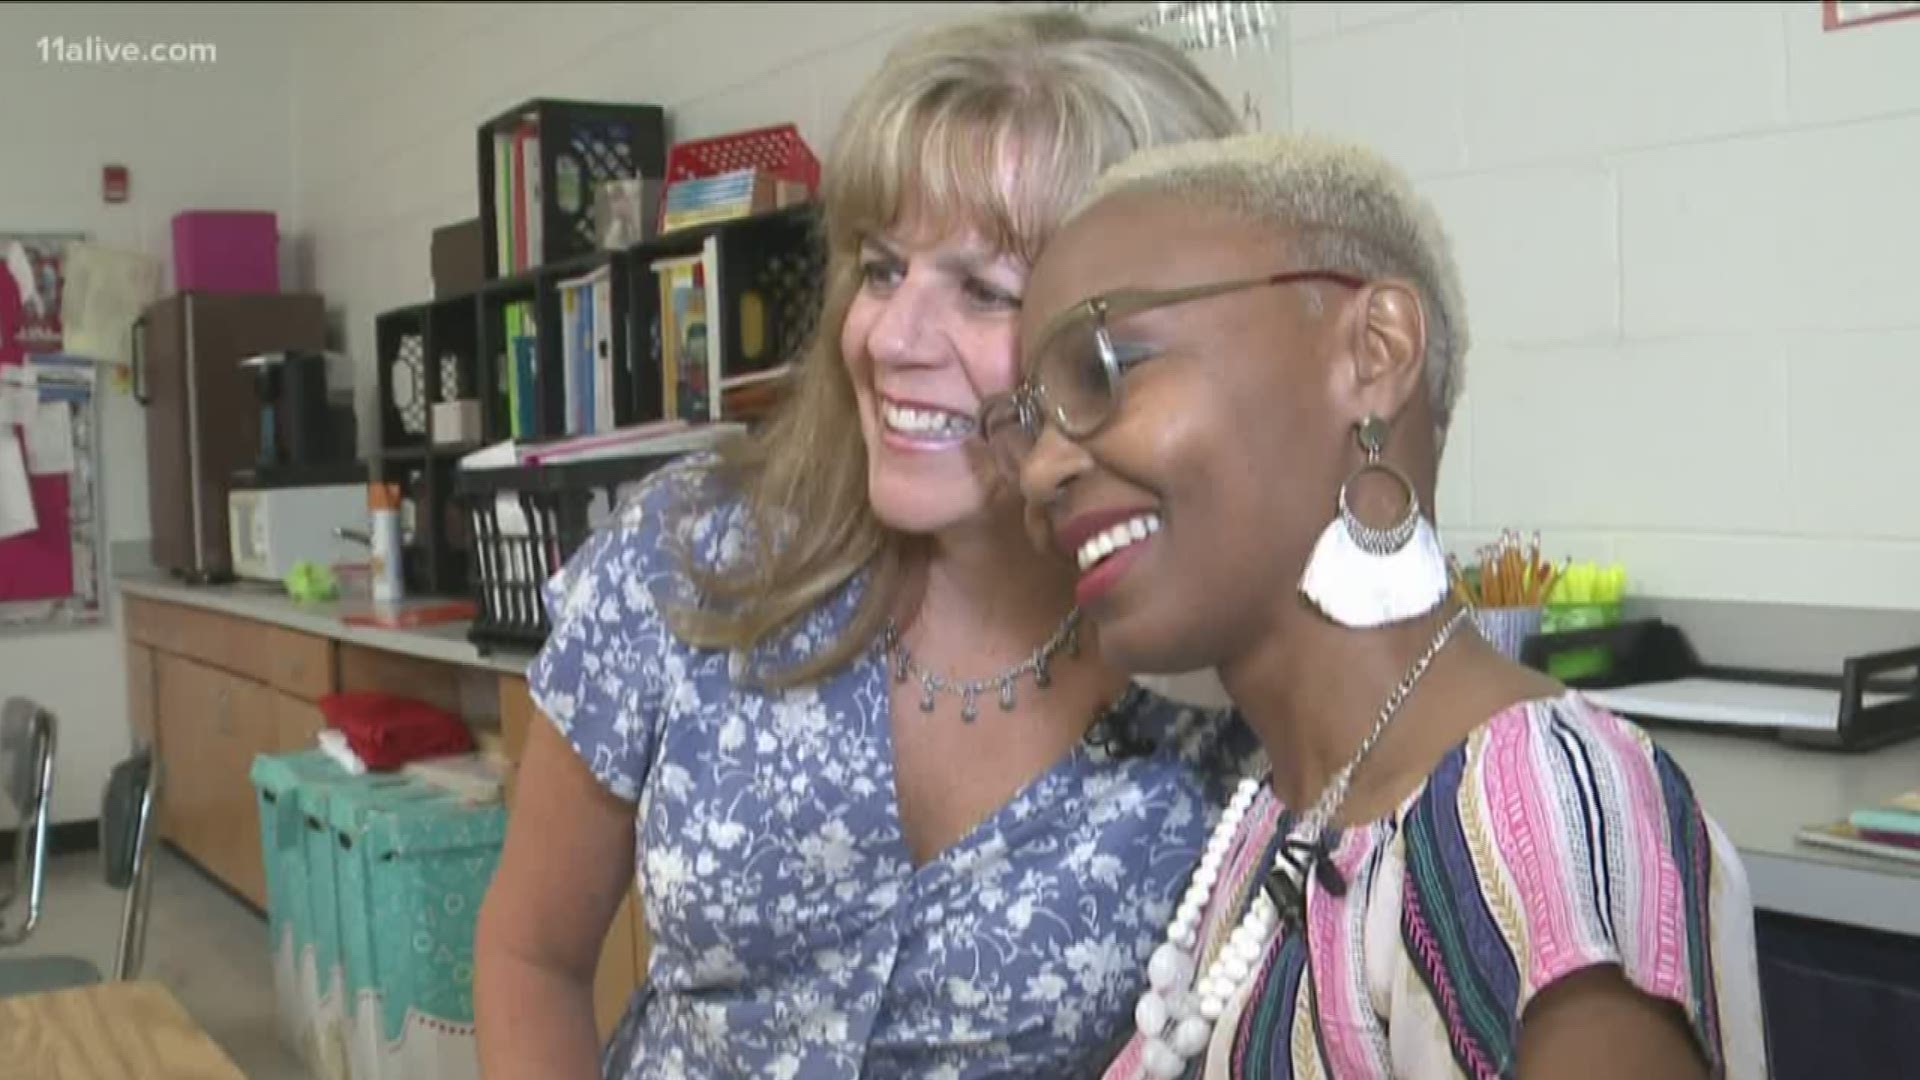 A counselor at Woodland Elementary School donated her kidney to a teacher at Woodland back in April, even though they barely knew each other.